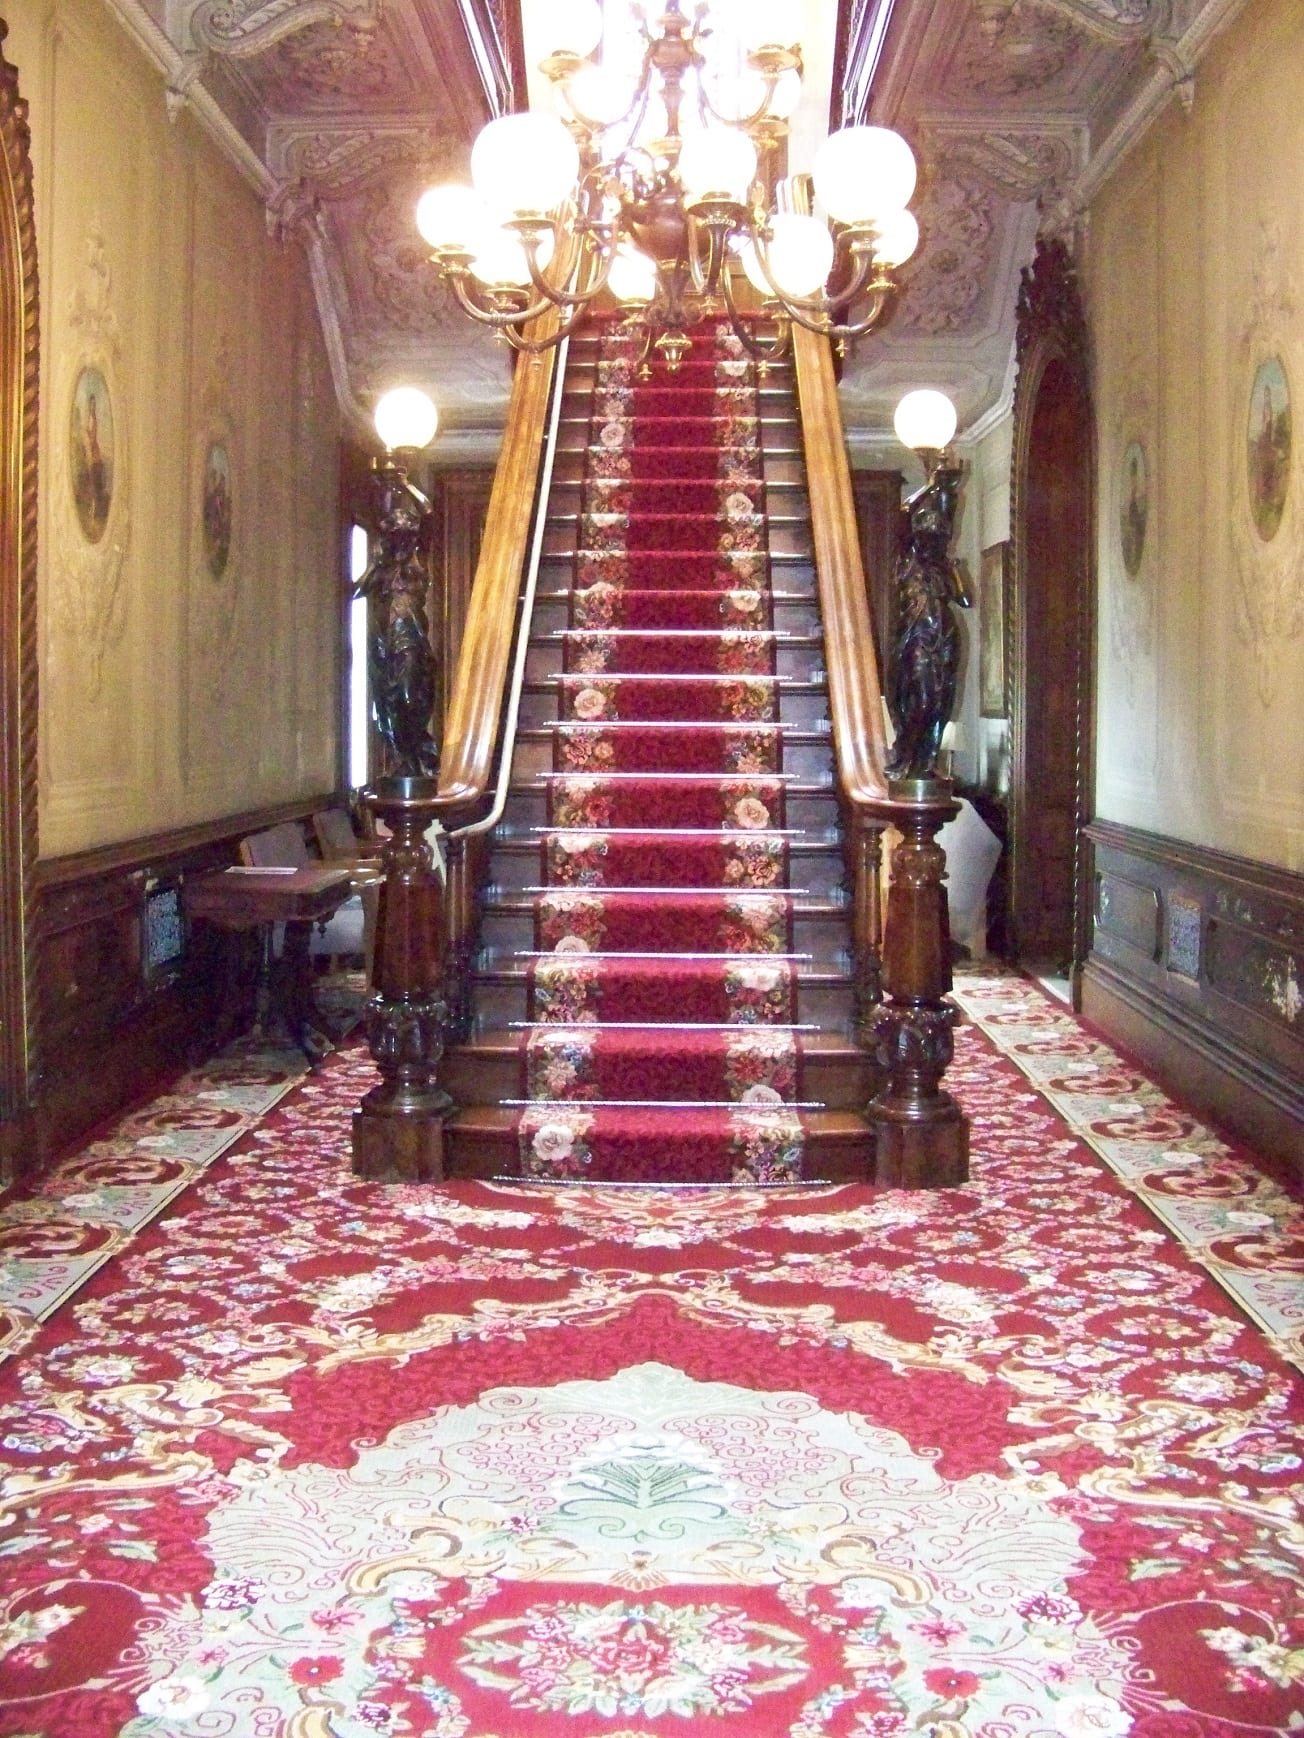 hallway view showing an area rug and carpeted staircase